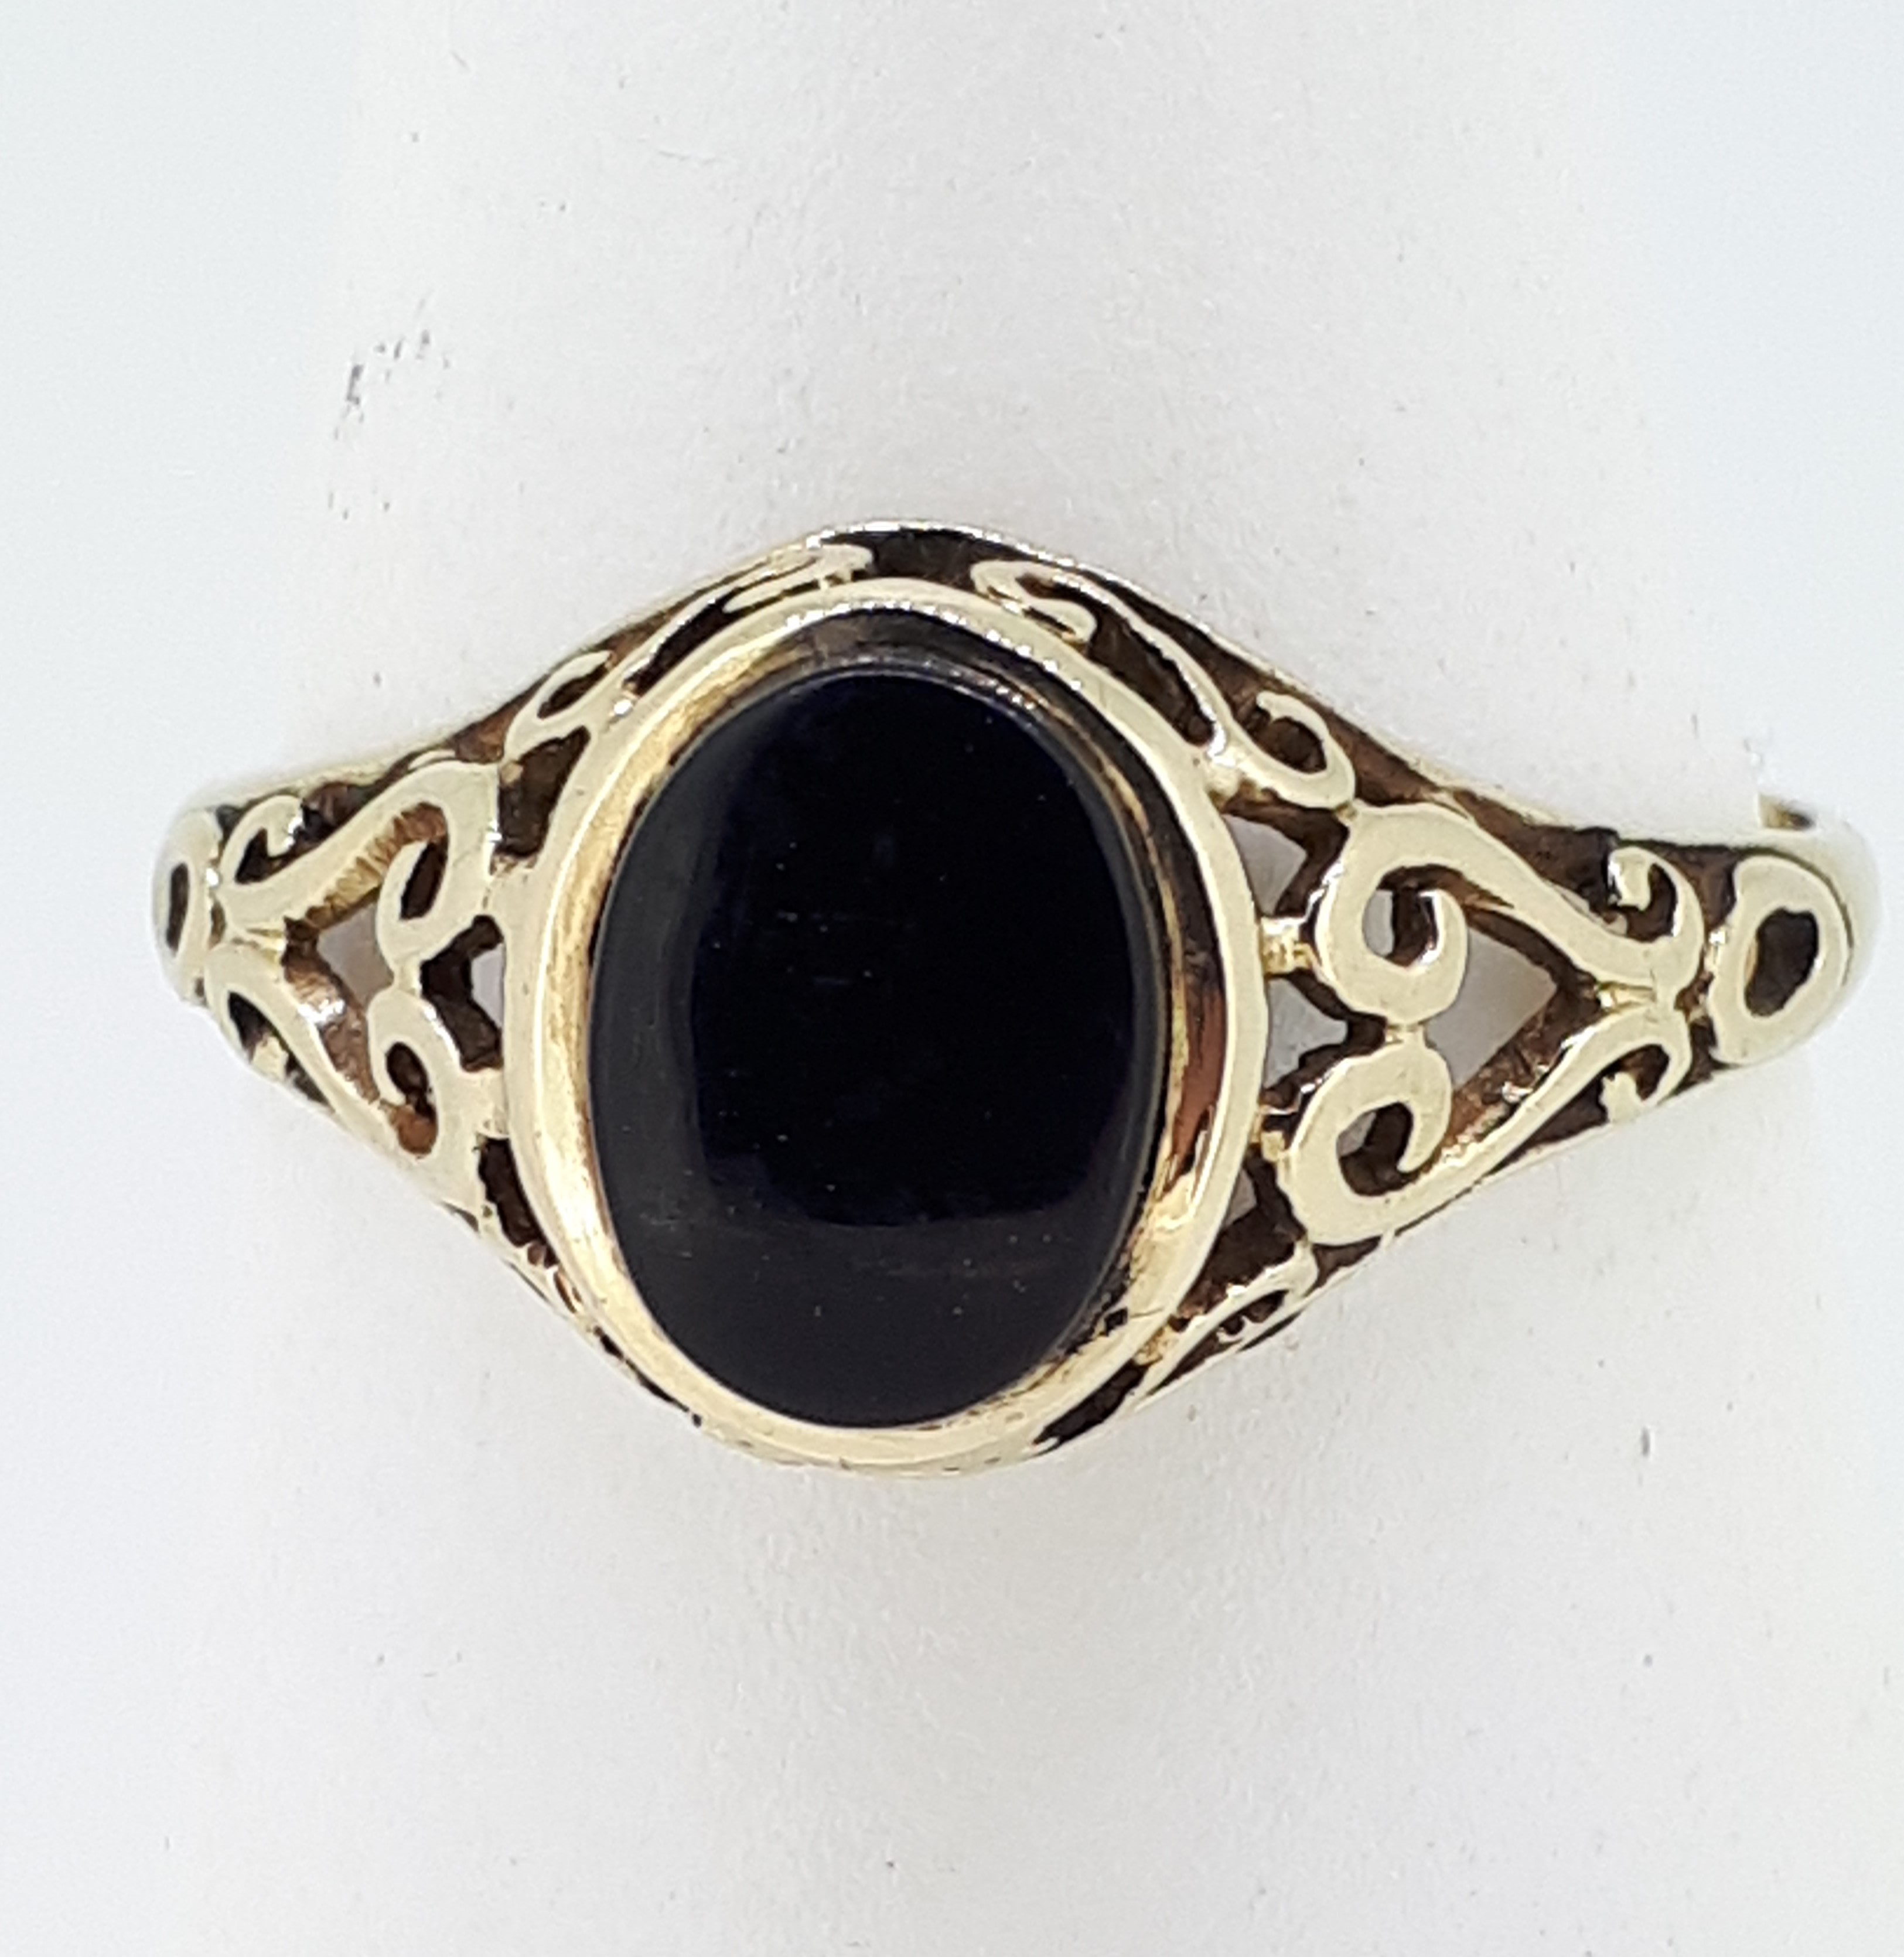 9ct (375) Yellow Gold Oval Onyx Signet Ring - Image 5 of 5